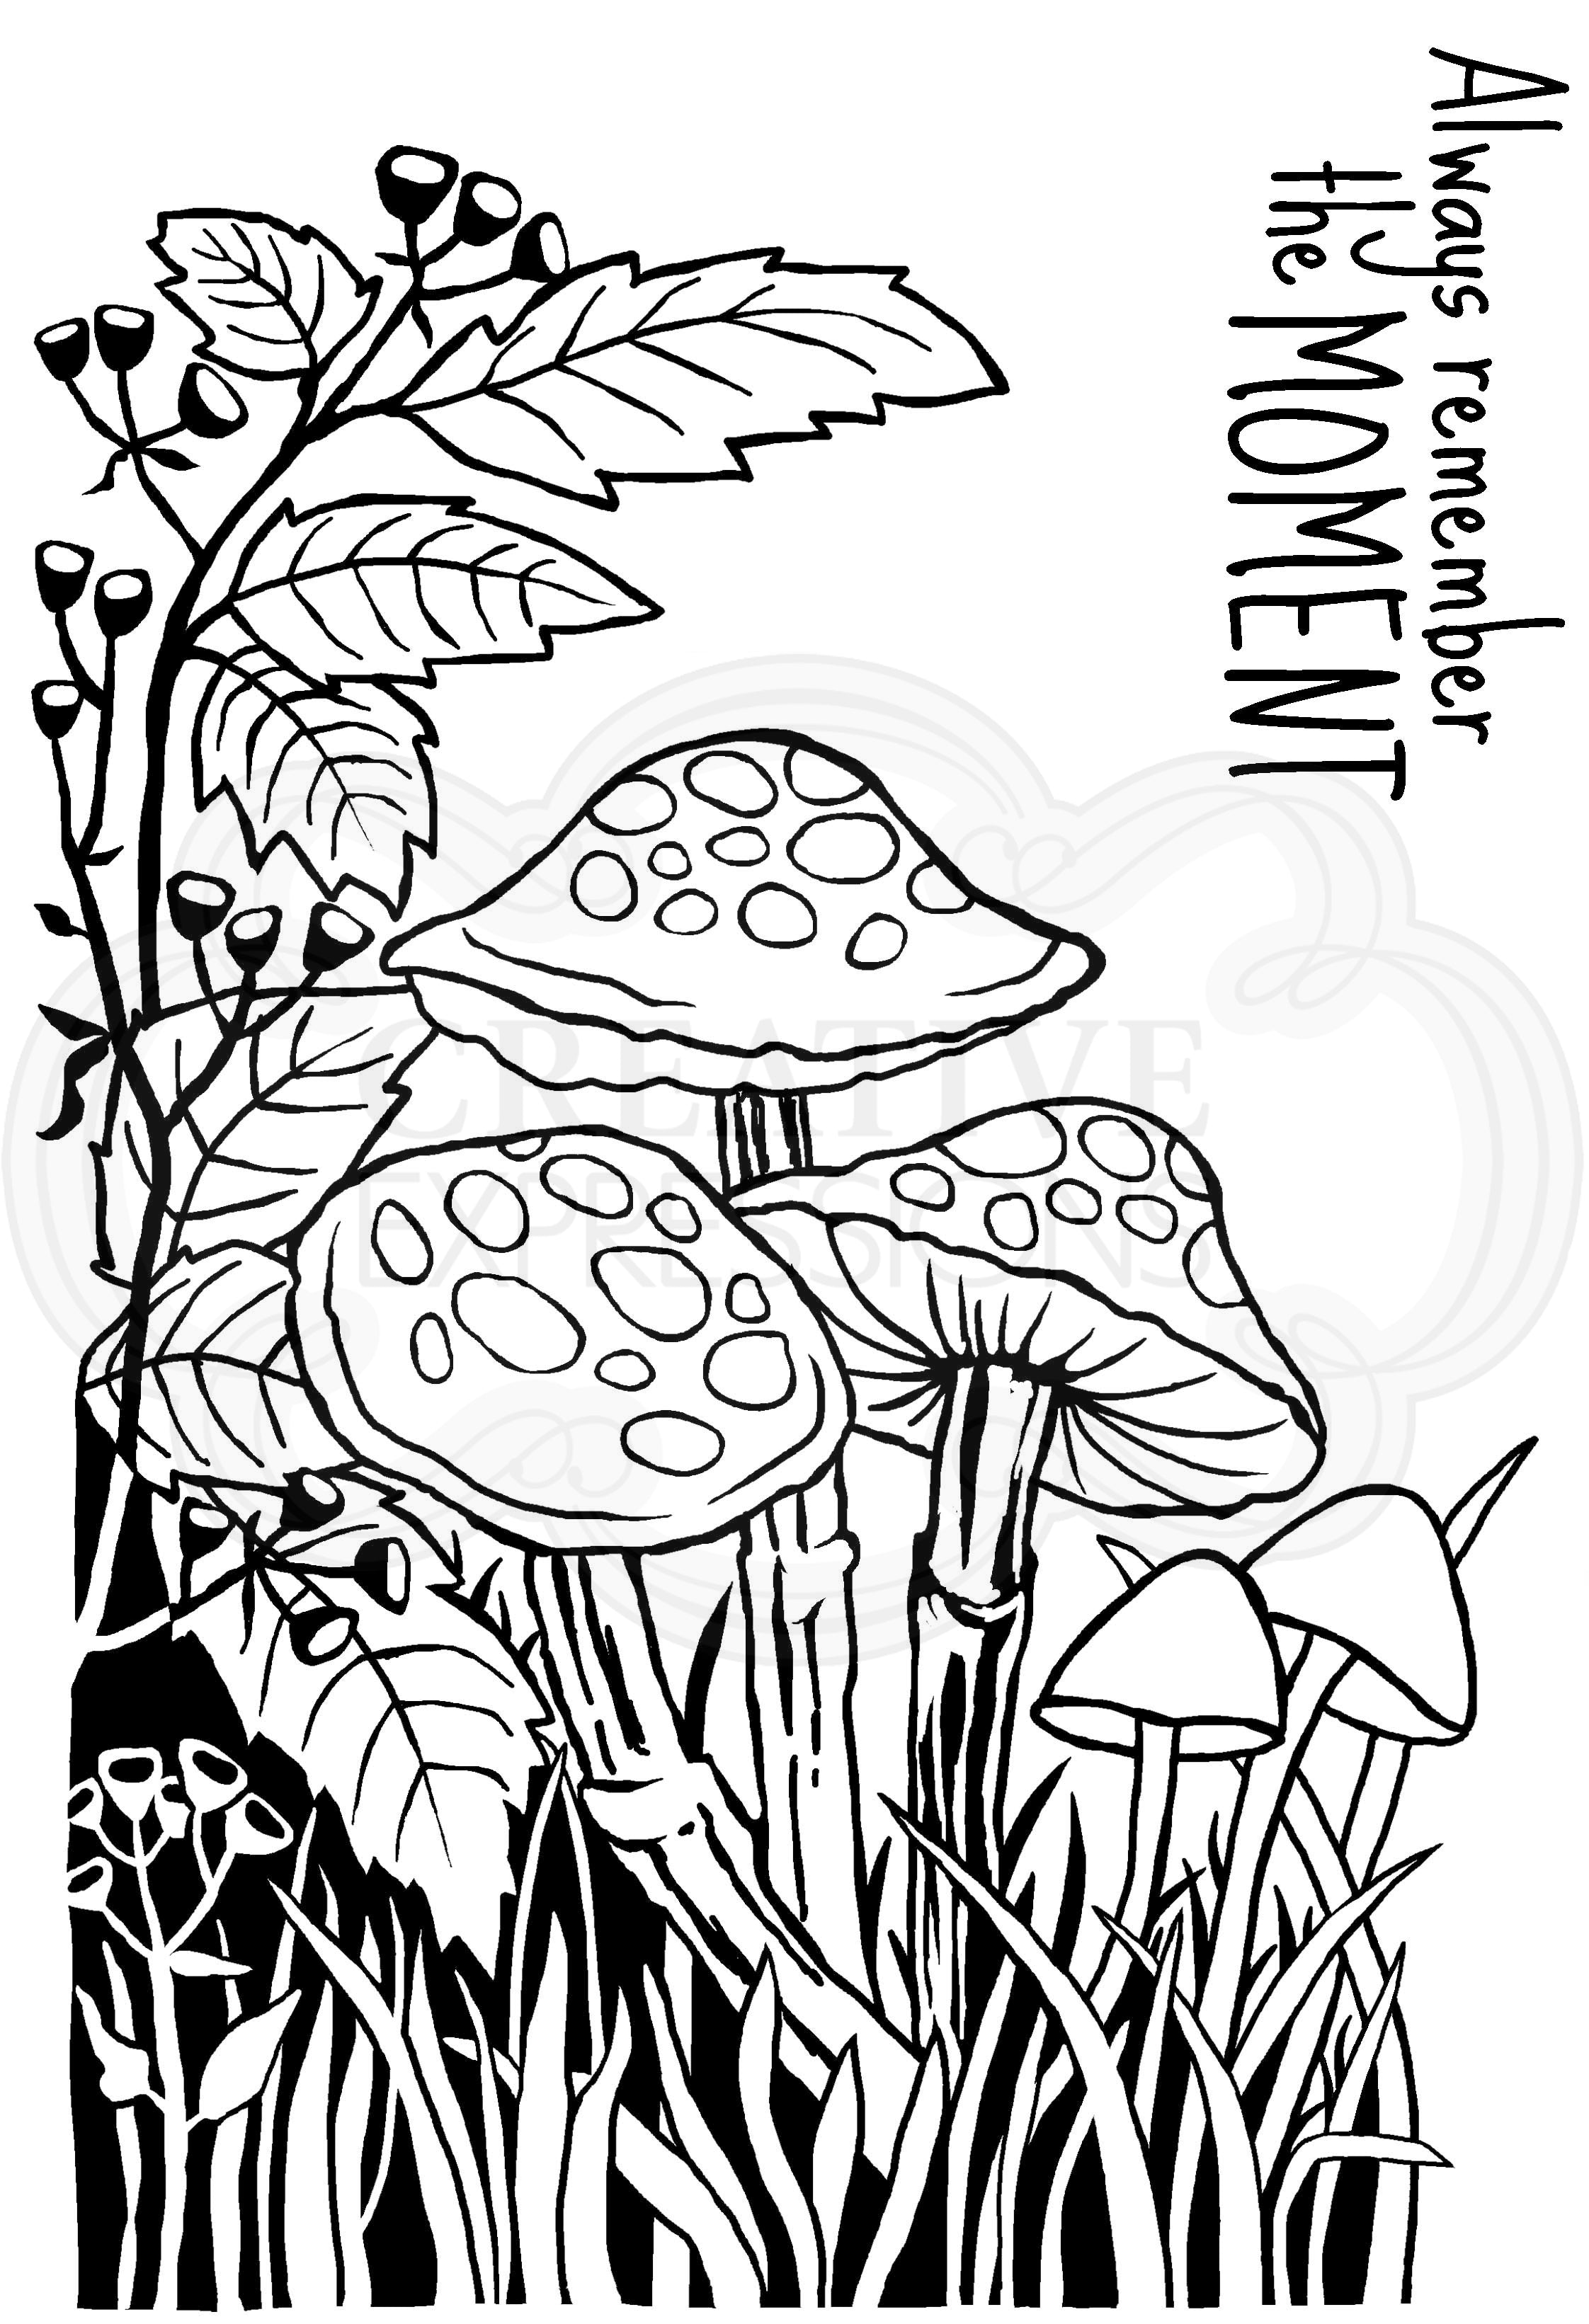 Woodware Clear Singles Lino Cut - Toadstools  4 in x 6 in Stamp